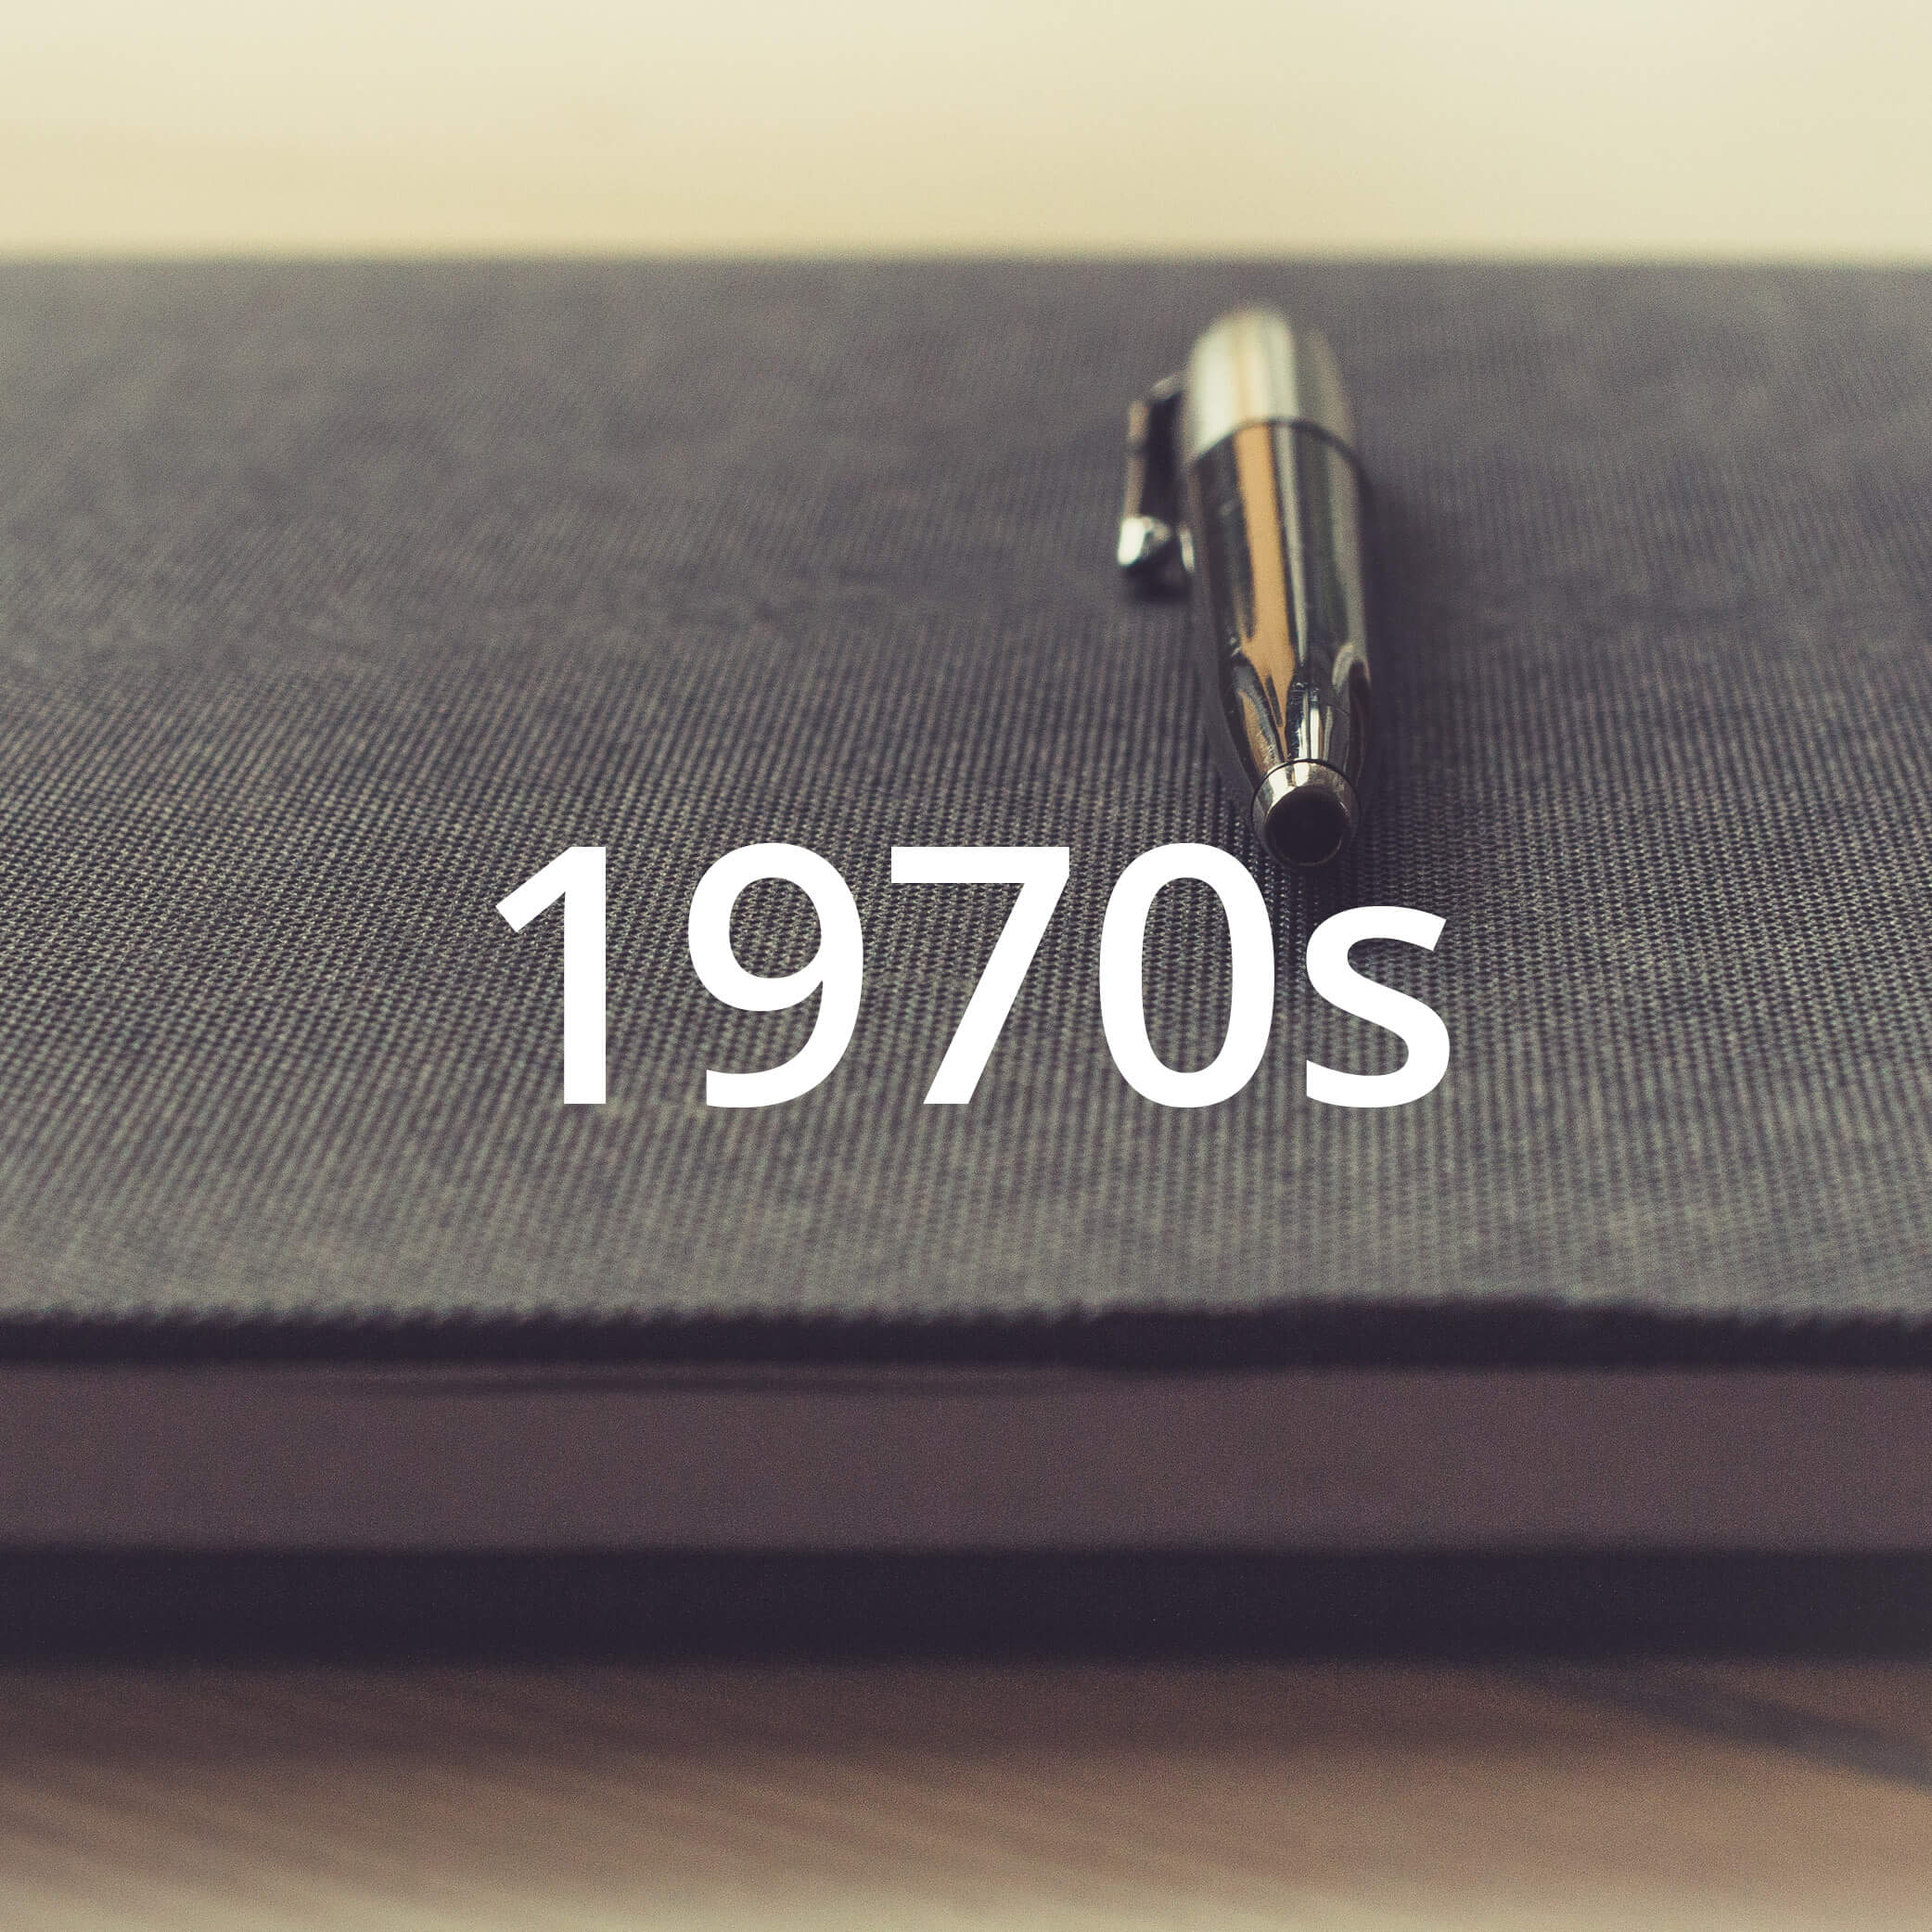 Photo of a pen laying on a book. Photo also features a text overlay that reads "1970s".